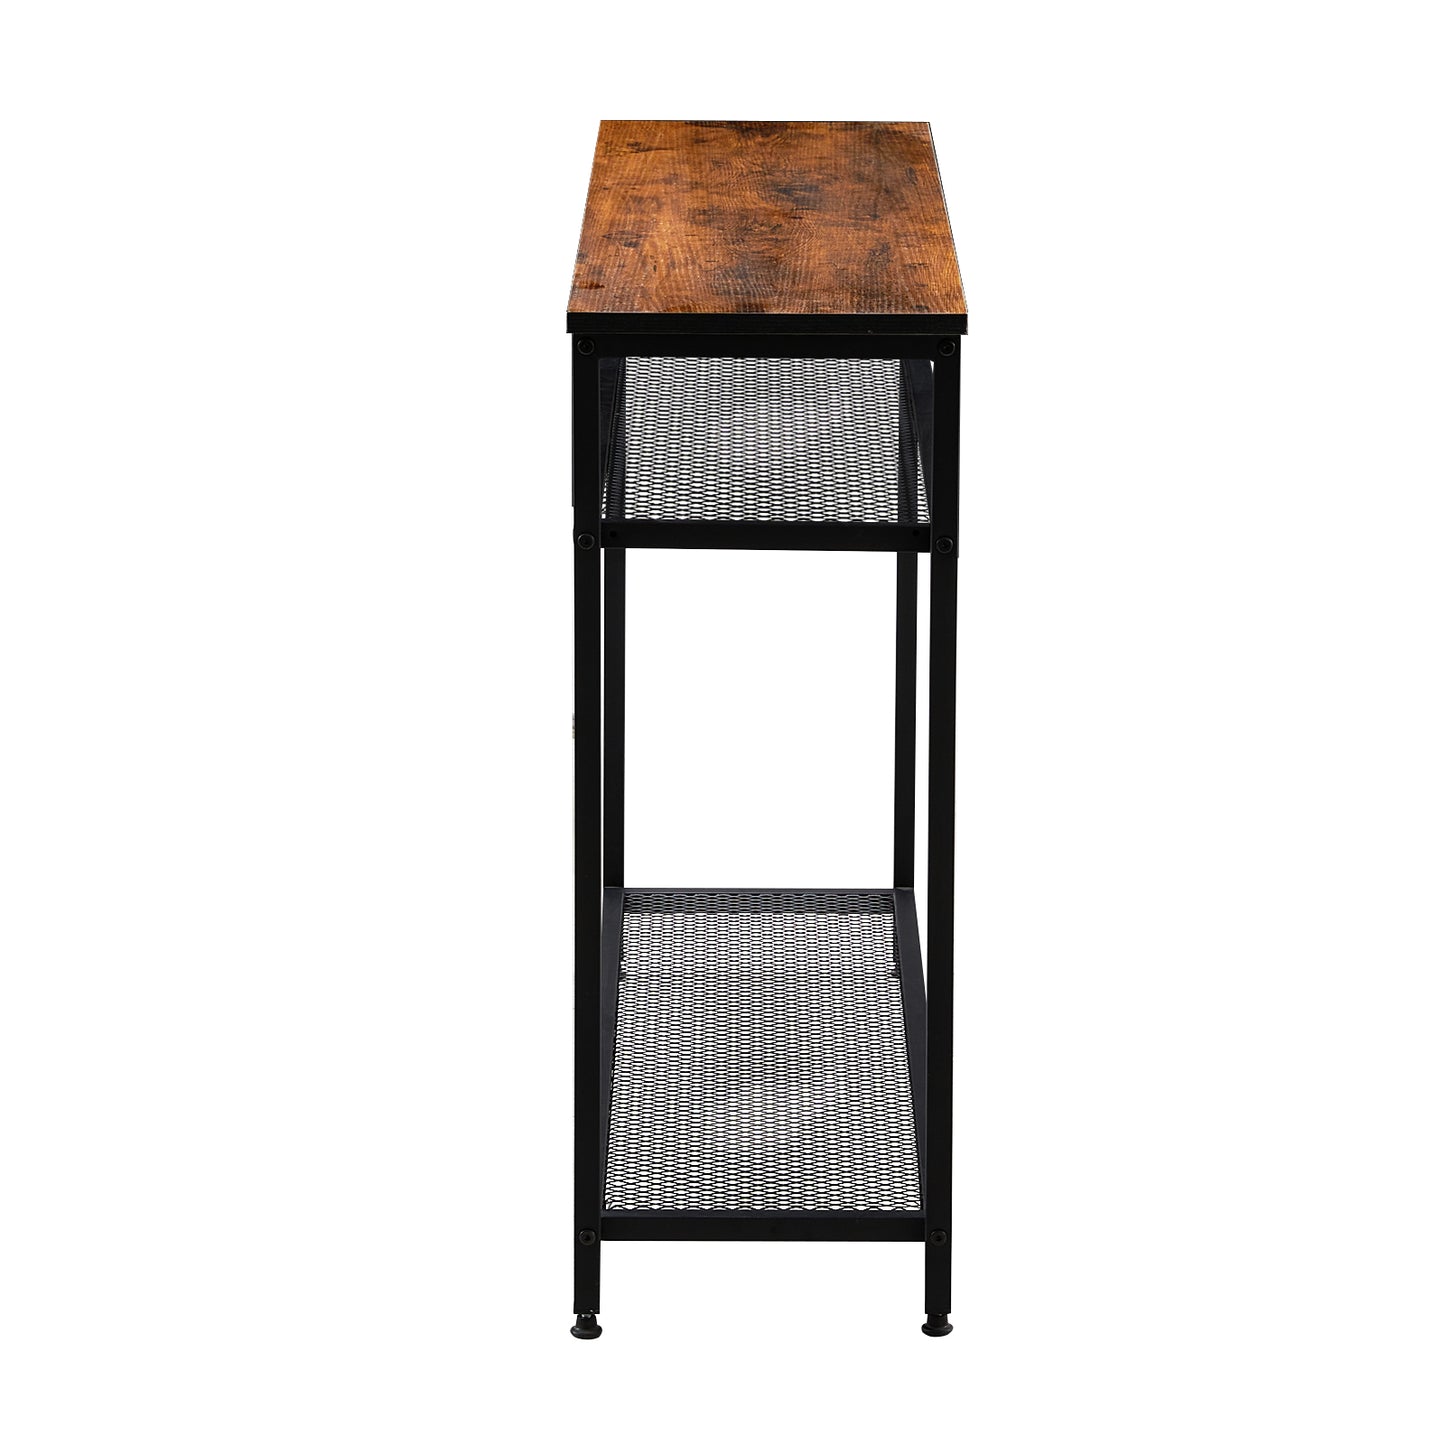 HAW 3-Tier Console Table with Storage Shelf - Rustic Brown